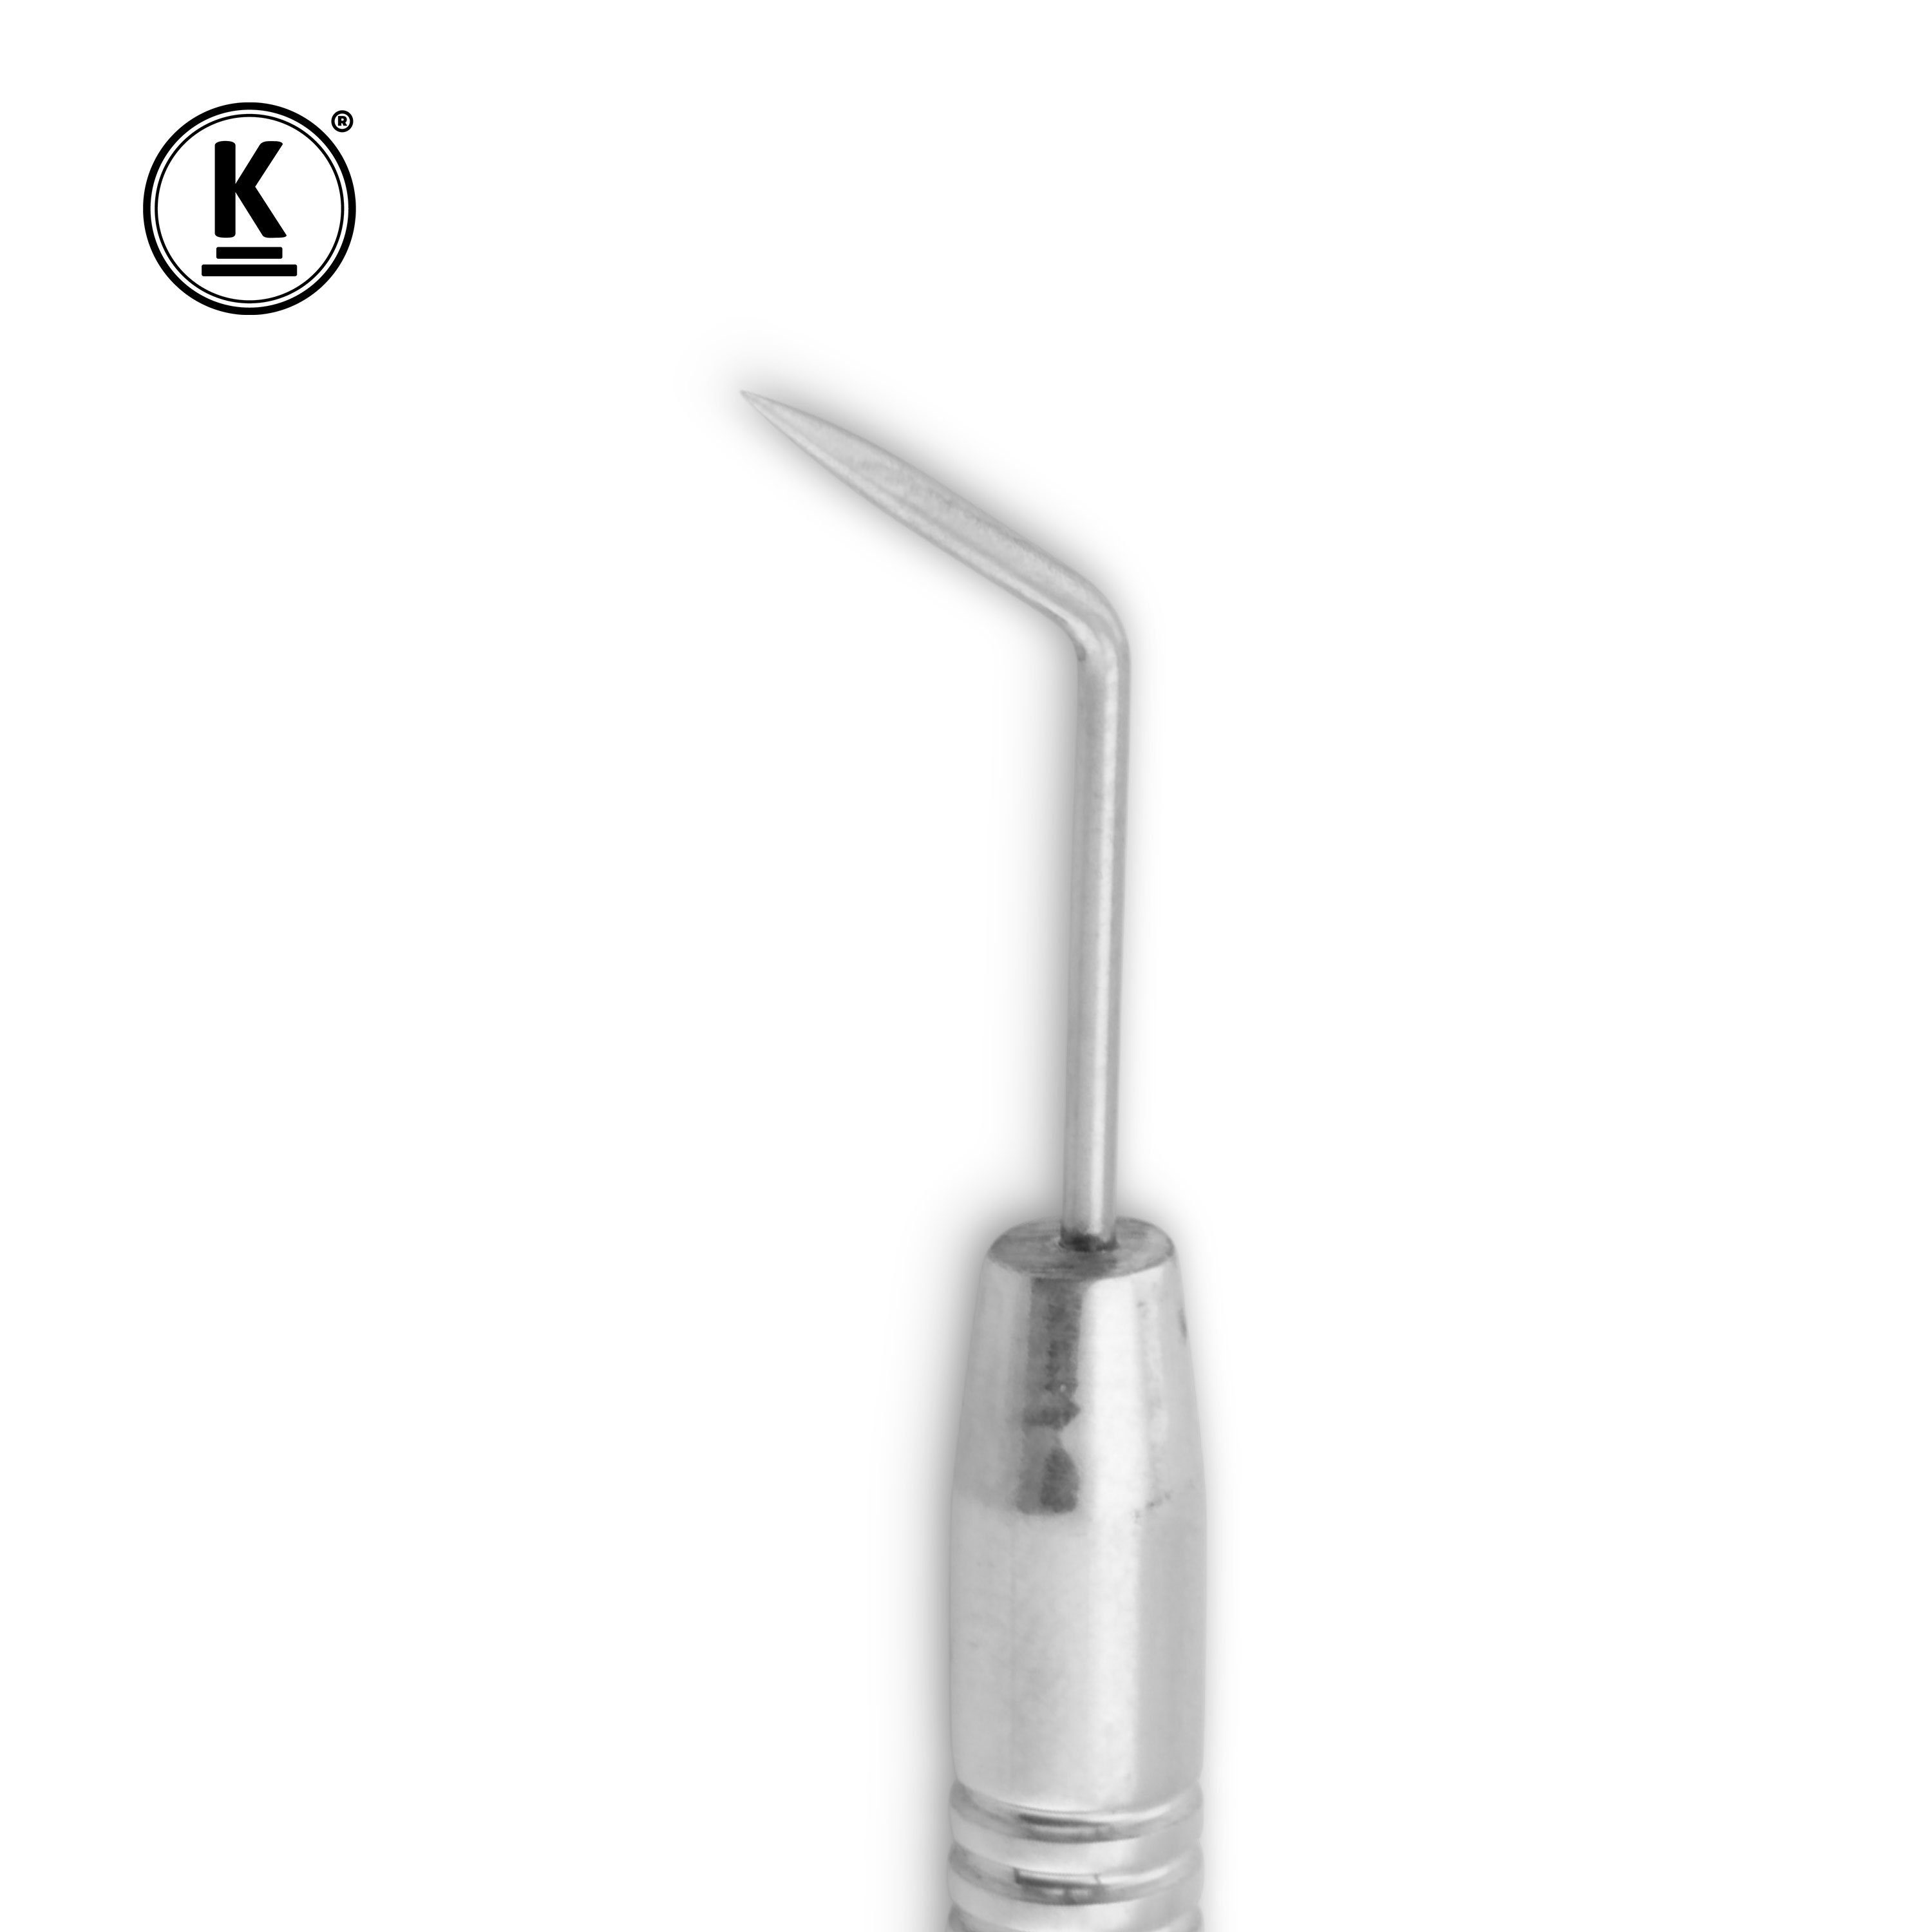 K-Pro Wimpernkamm Wimpern Lifting Tool Seperator Kamm & - Wimpernlifting